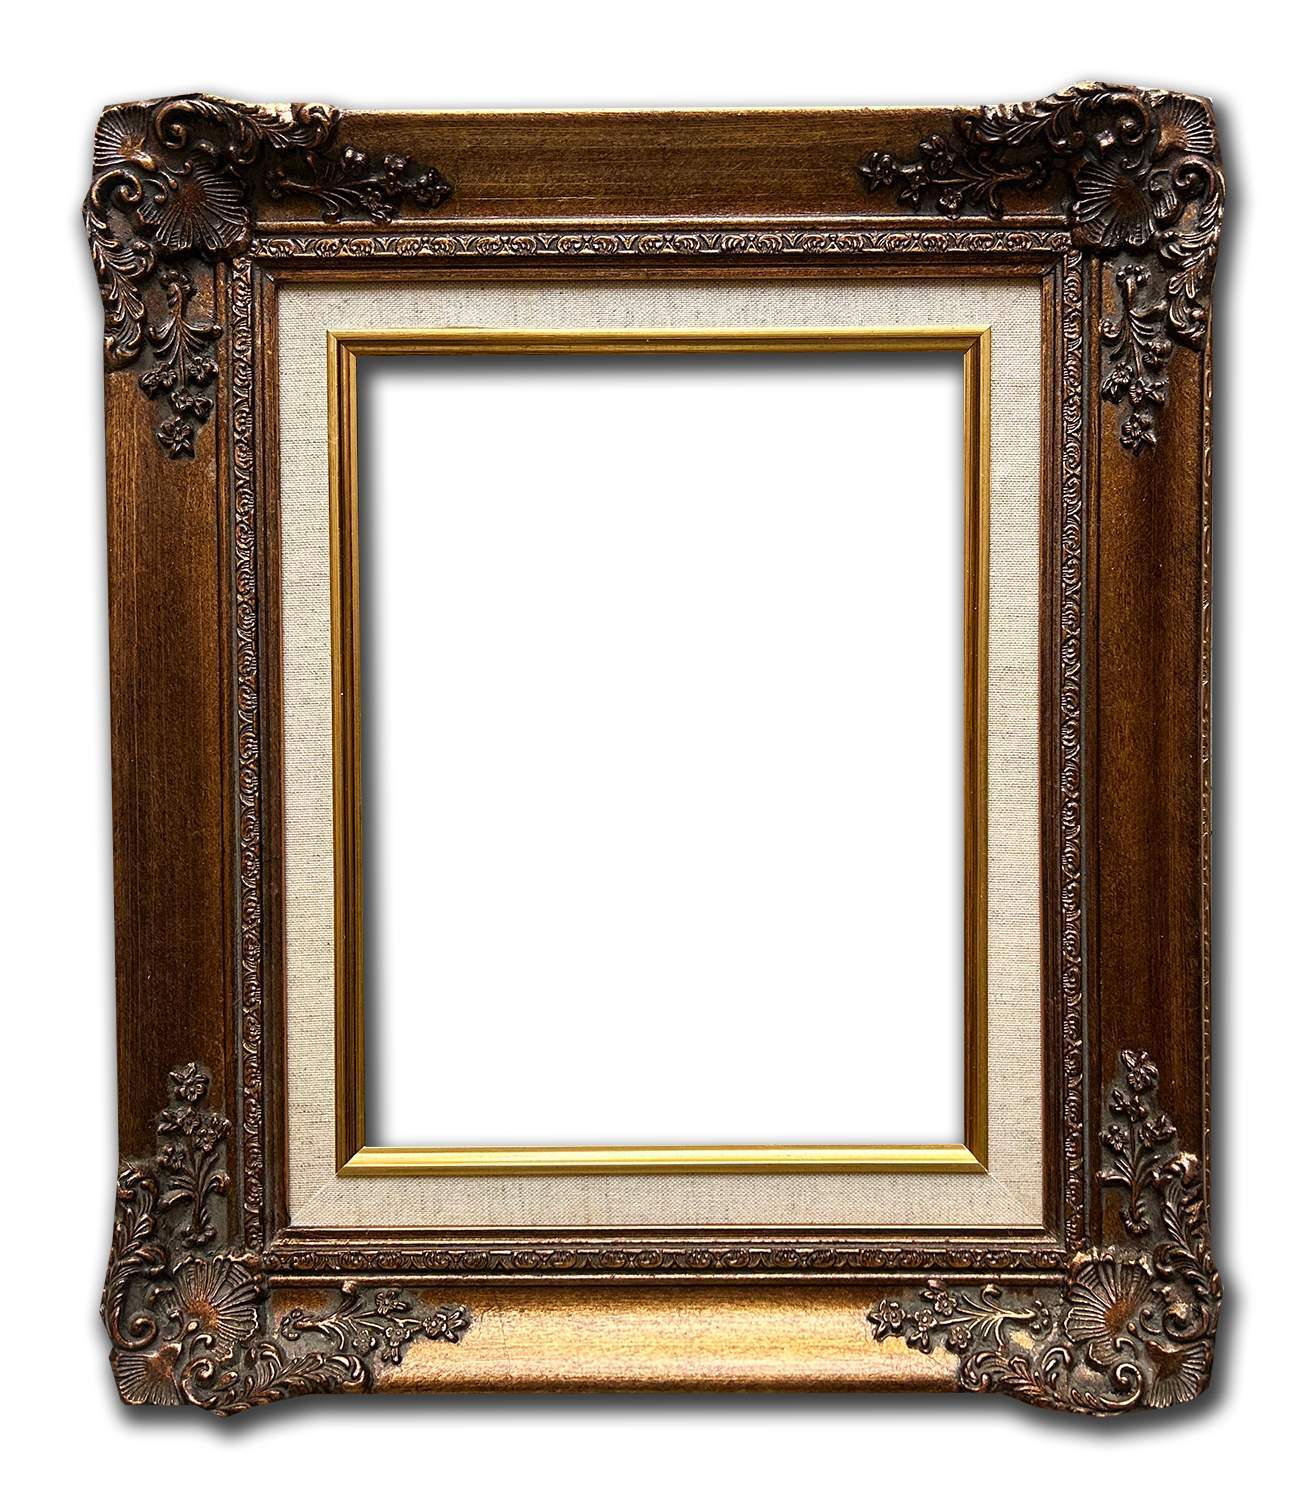 21x27 cm or 8x10 ins, wooden photo frame